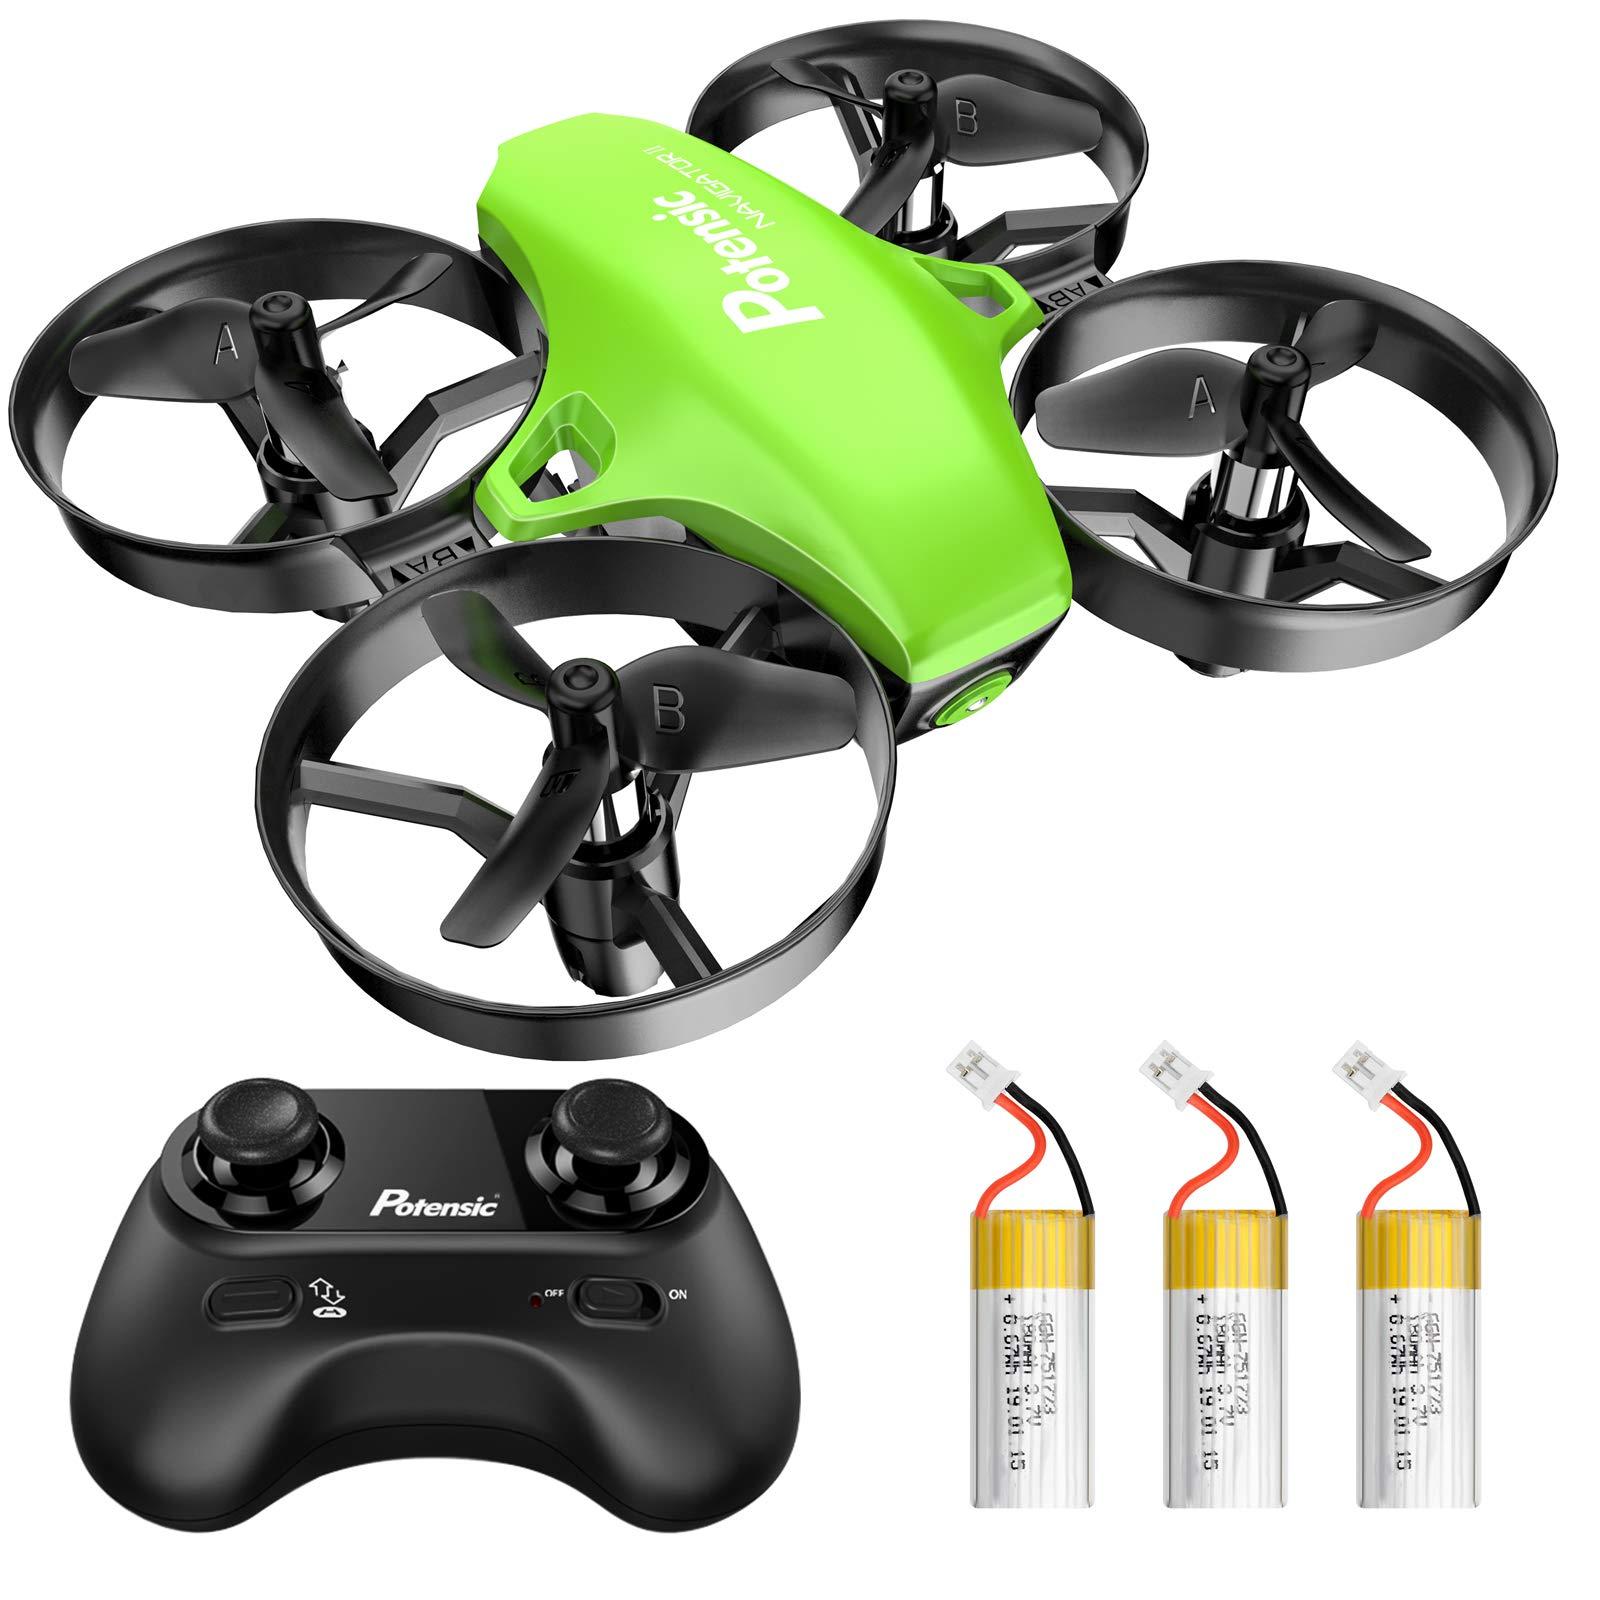 Remote Control Helicopter From Amazon:  Basic dimensions about the product.Basic dimensions and features of the Potensic A20W Mini Drone.